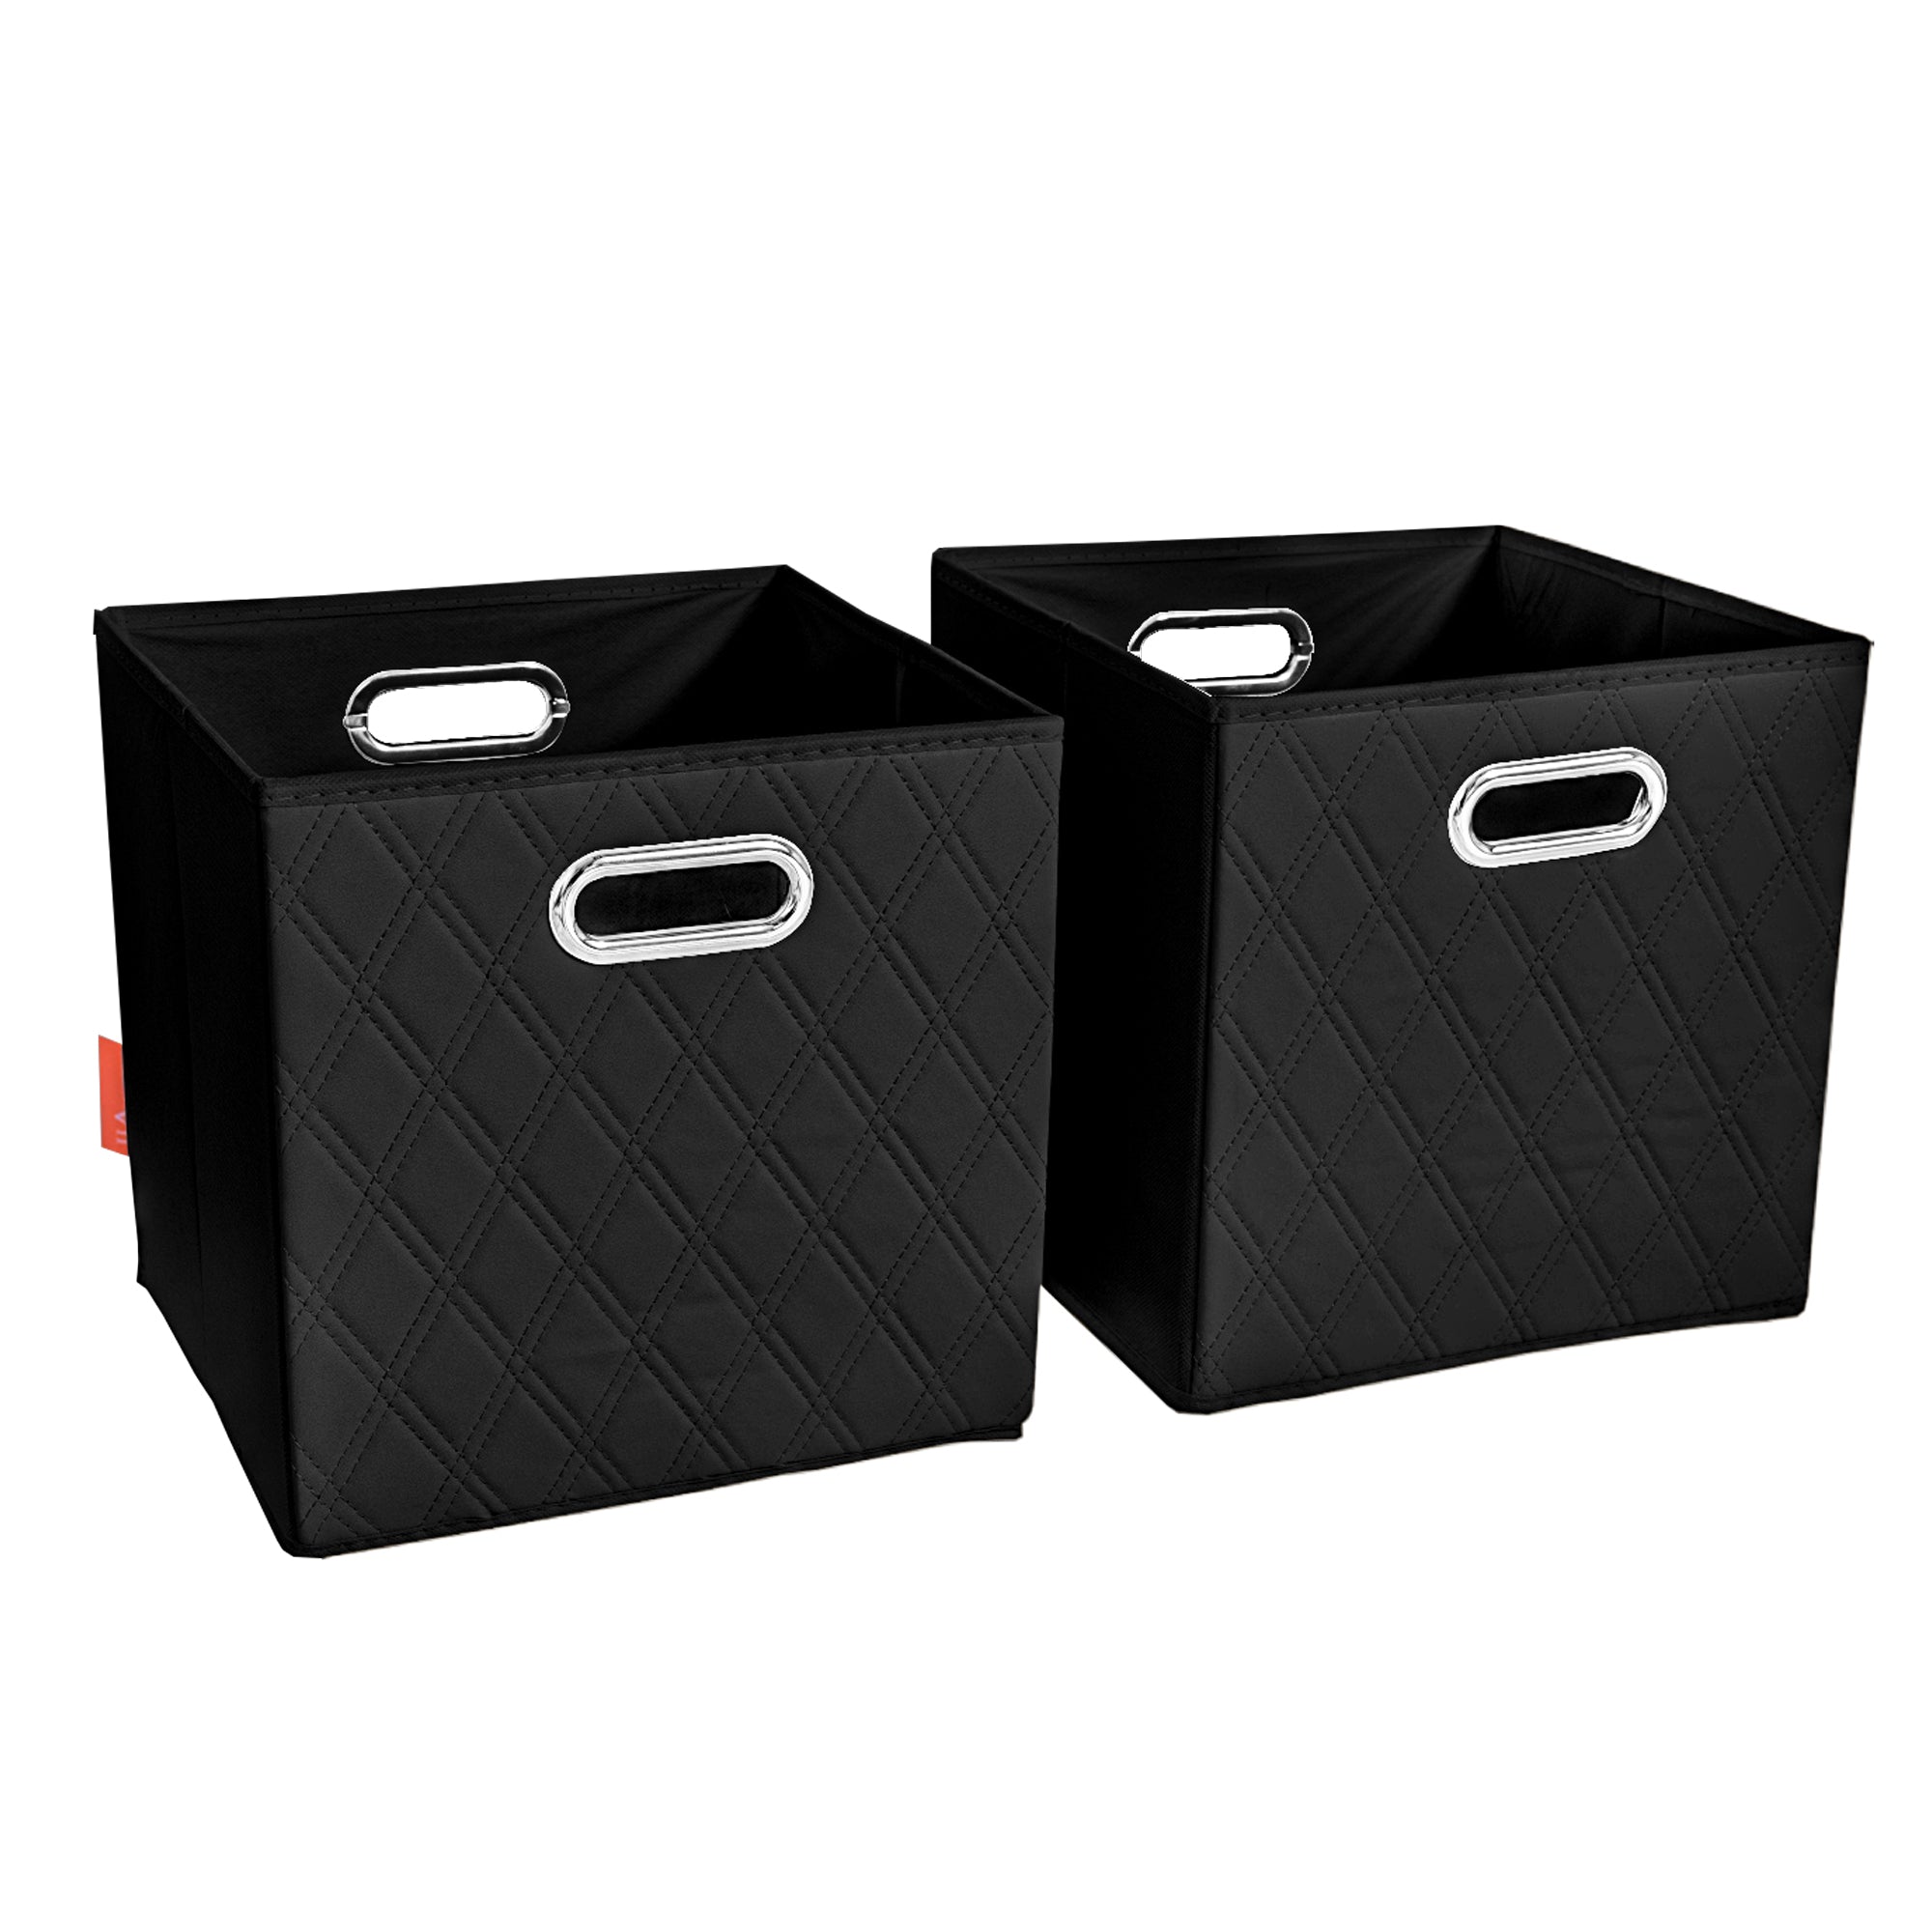 JIAessentials 12 inch Foldable Diamond Patterned Faux Leather Storage Cube Bins Set of Two with Dual Handles - 12" Black